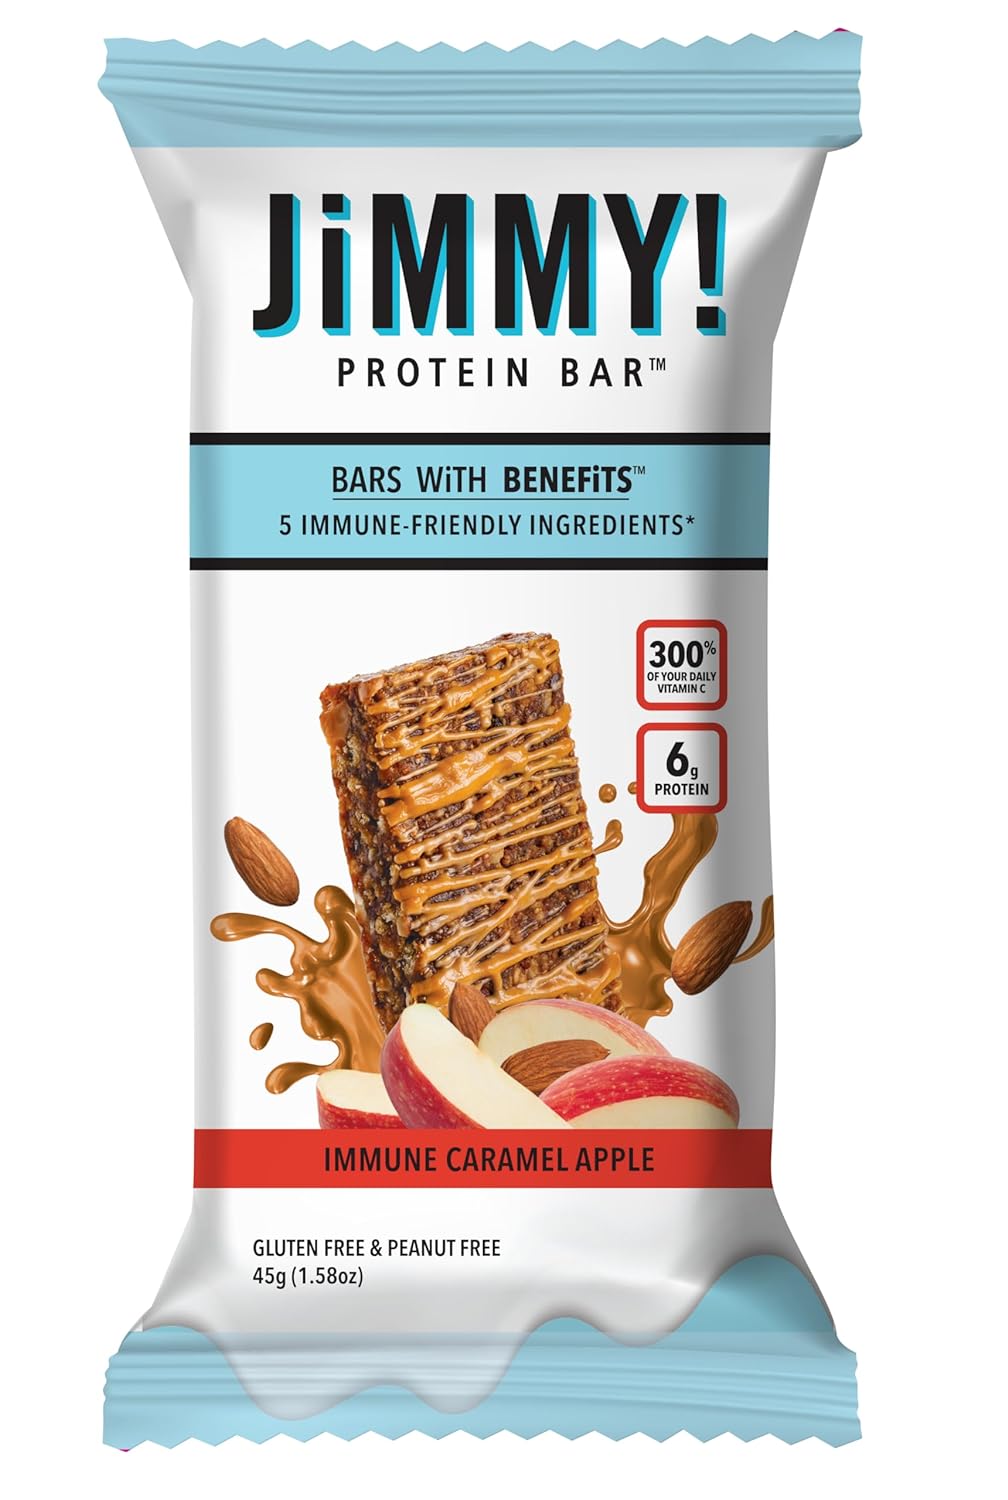 JiMMY! Protein Bar, Caramel Apple, Immune Support, 15 Count - Energy B1.56 Pounds